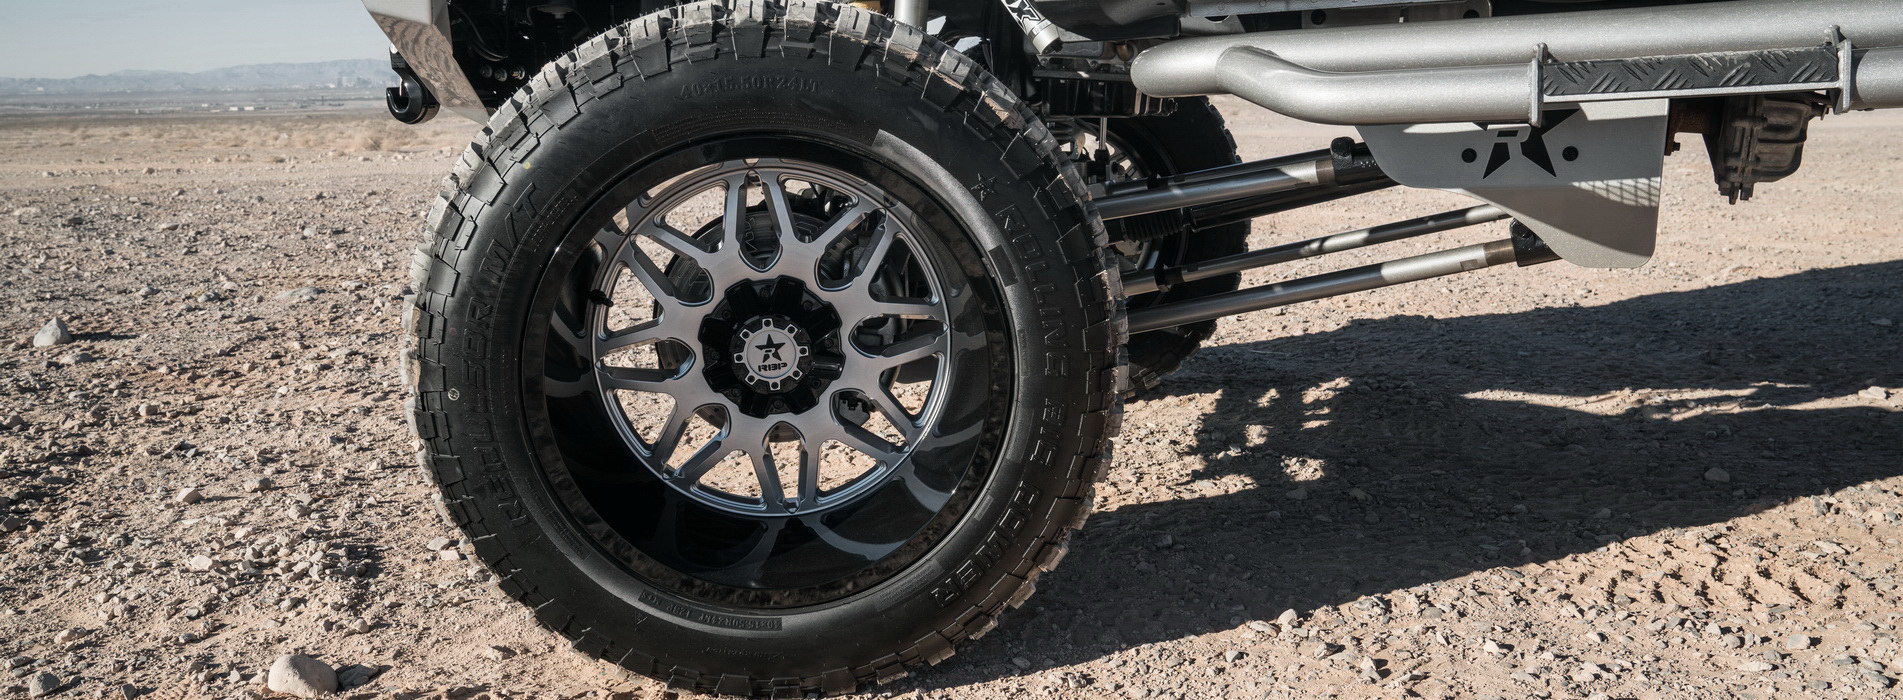 RBP wheels and accessories set off this lifted F250